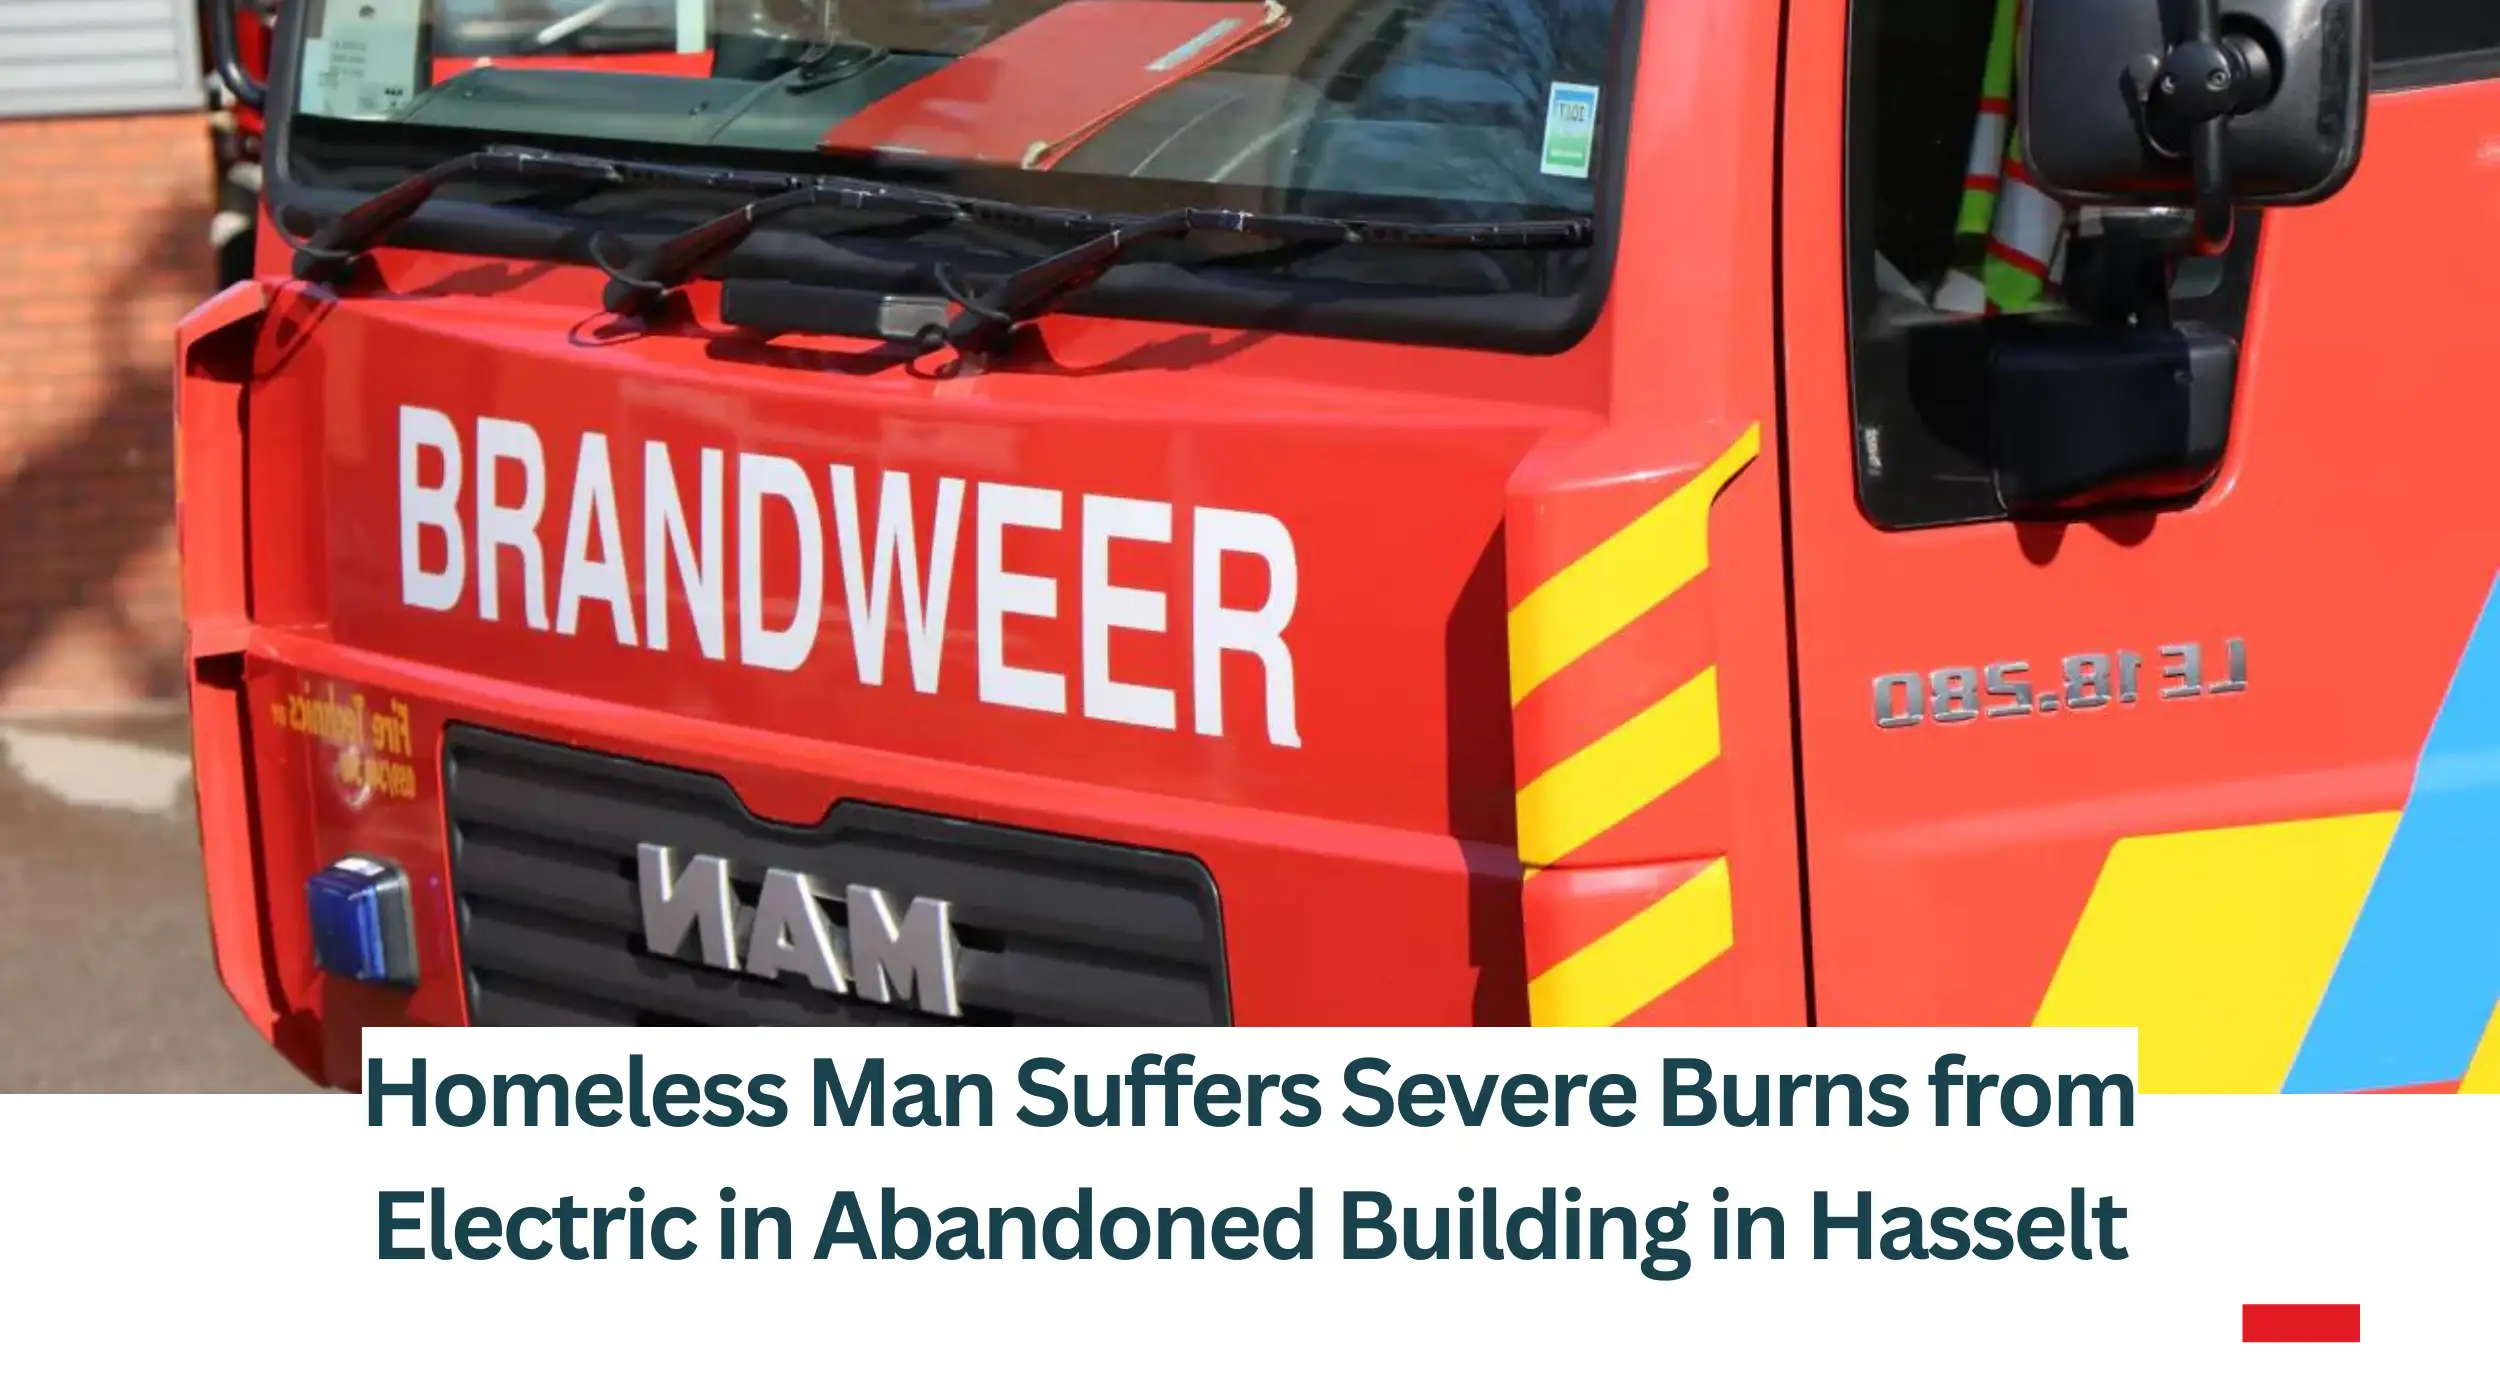 Homeless-Man-Suffers-Severe-Burns-from-Electric-in-Abandoned-Building-in-Hasselt